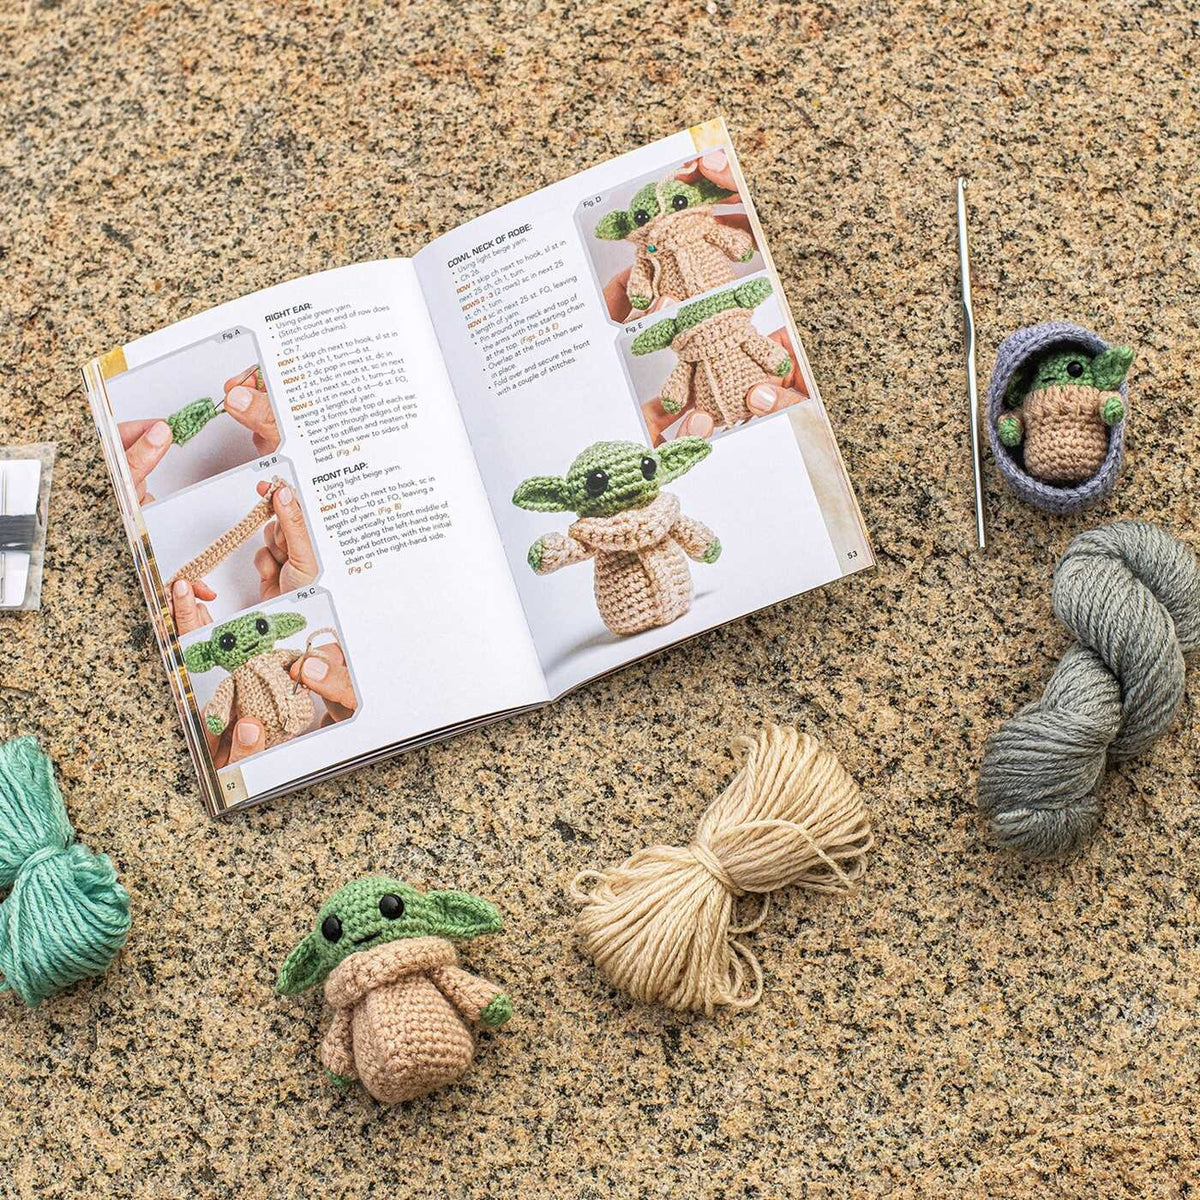  Whimsical Stitches: A Modern Makers Book of Amigurumi